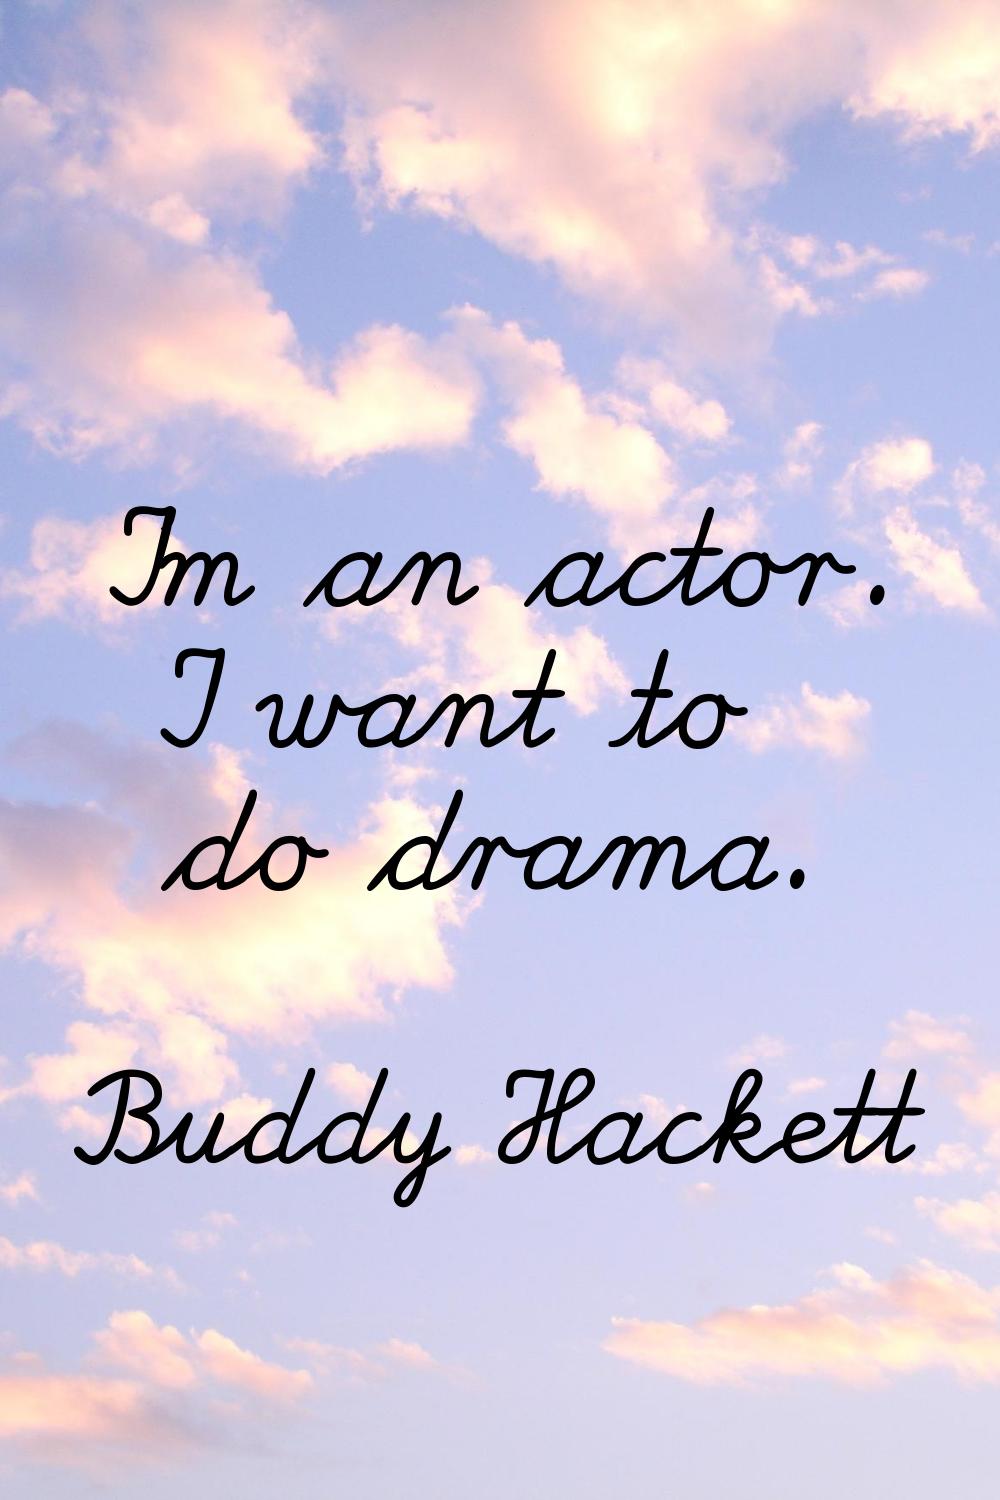 I'm an actor. I want to do drama.